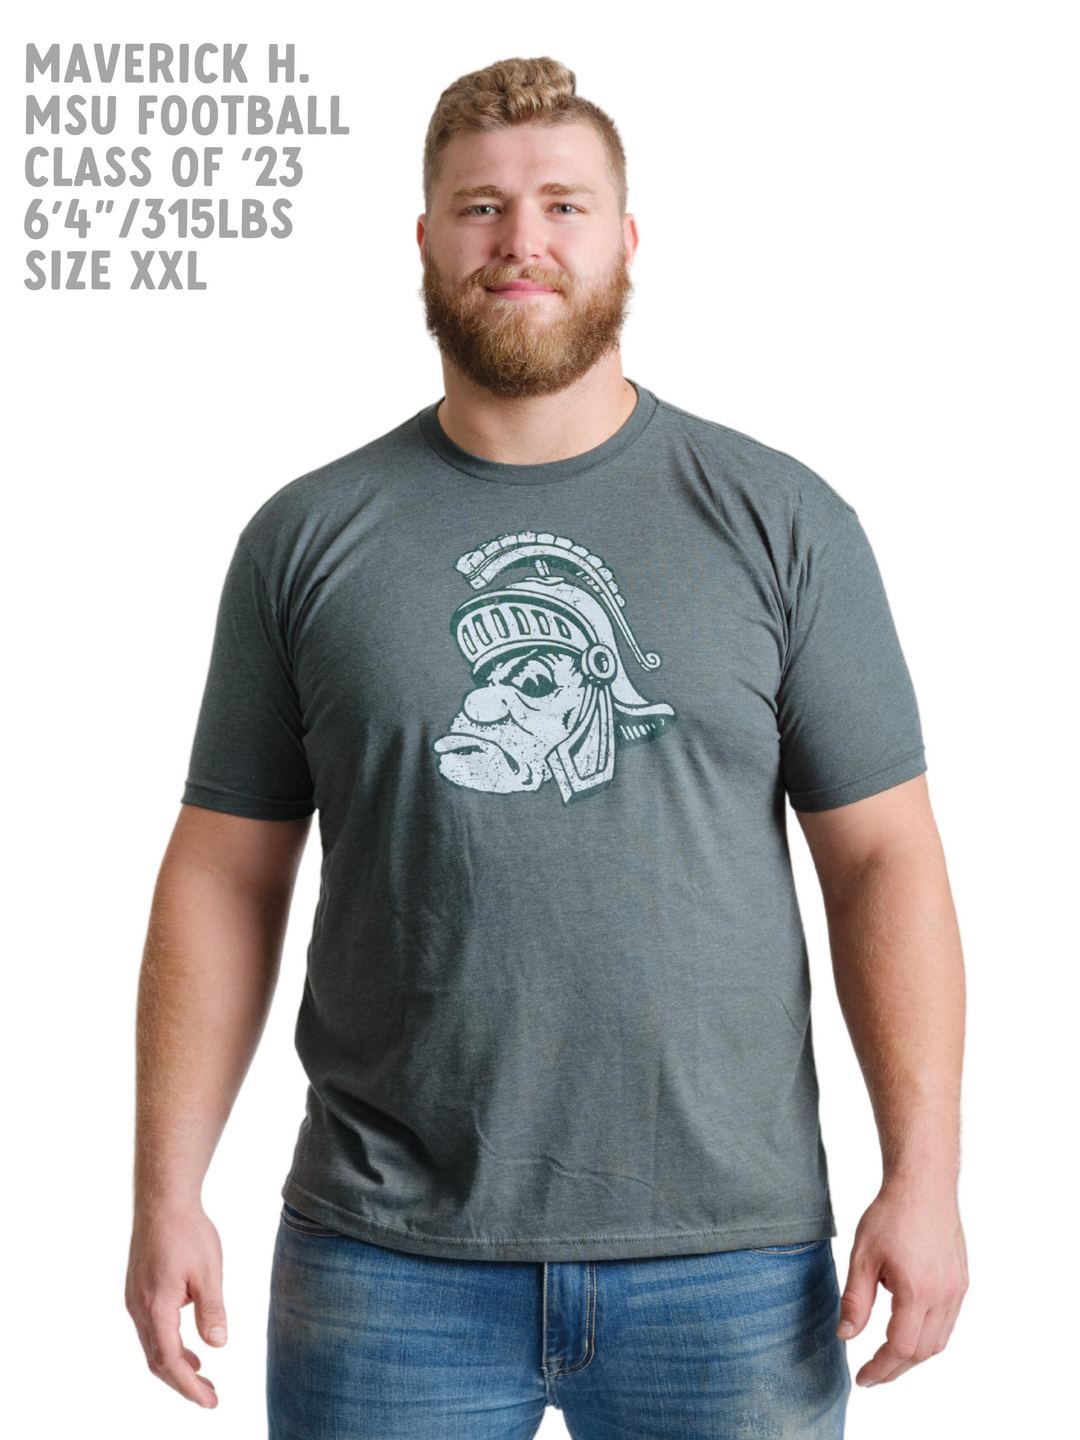 Vintage Michigan State Sparty T shirt from Nudge Printing